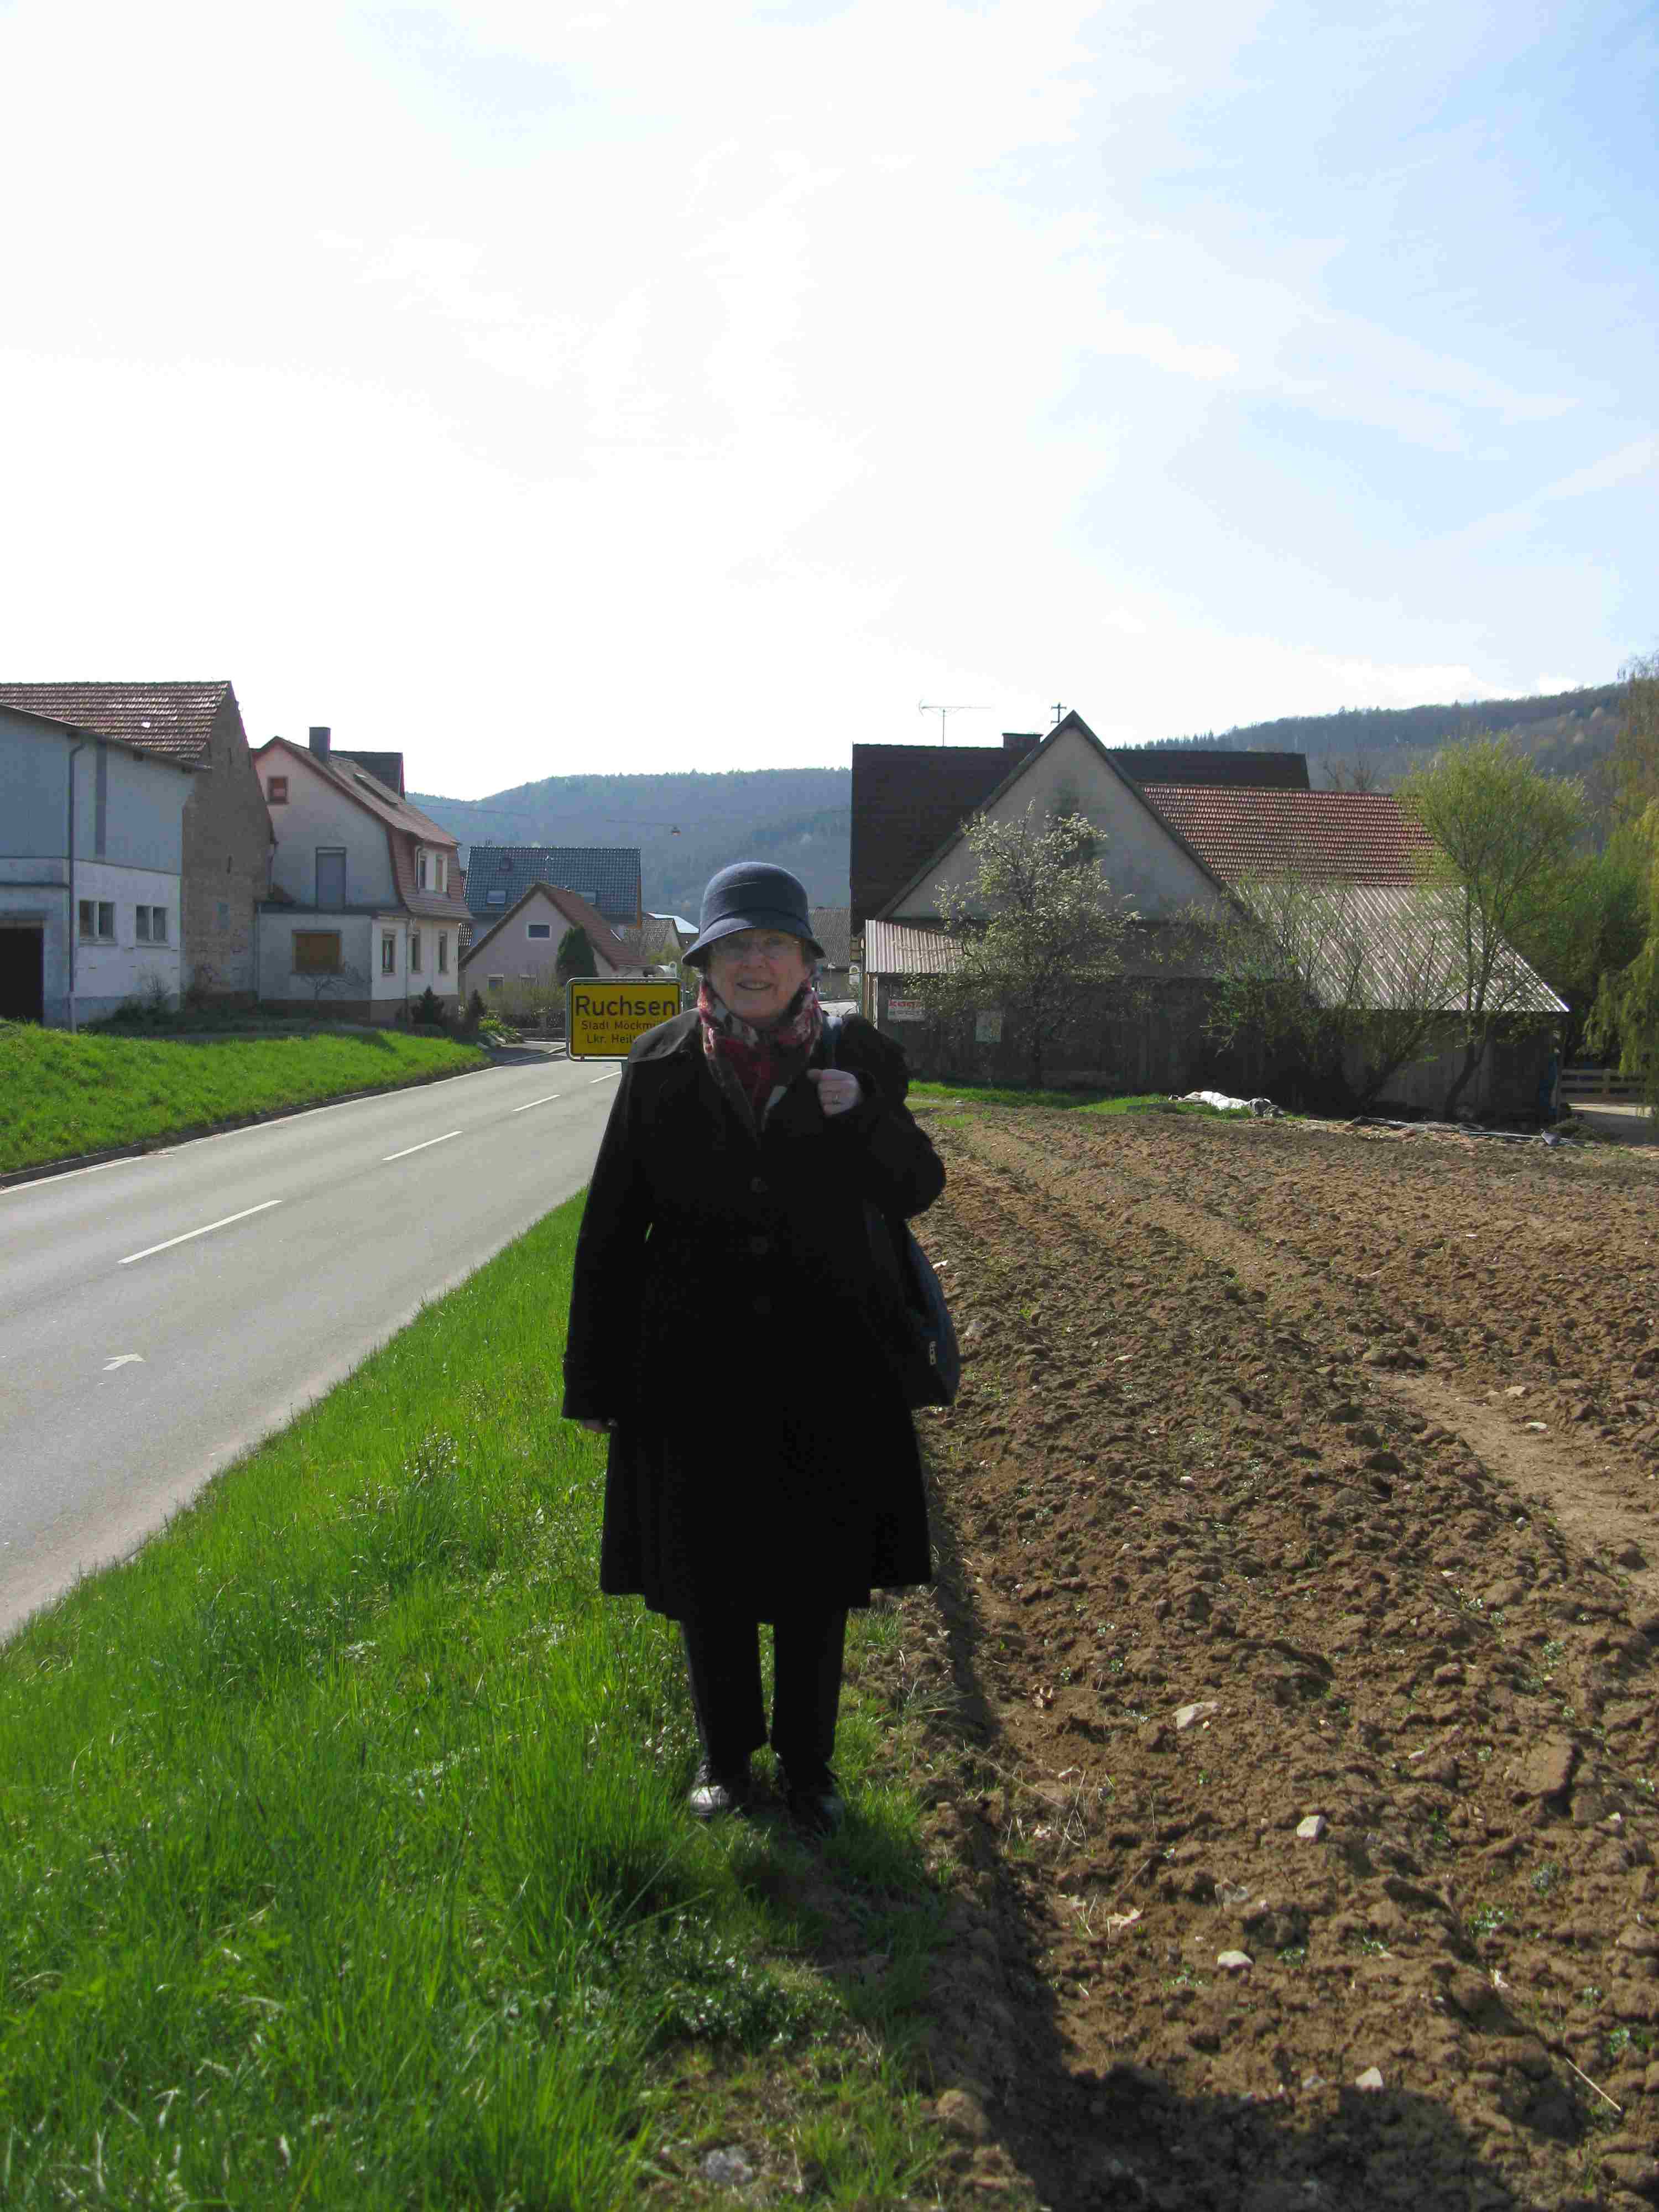 Elsa stands by the side of the road with the houses of the village of Ruchsen behind her